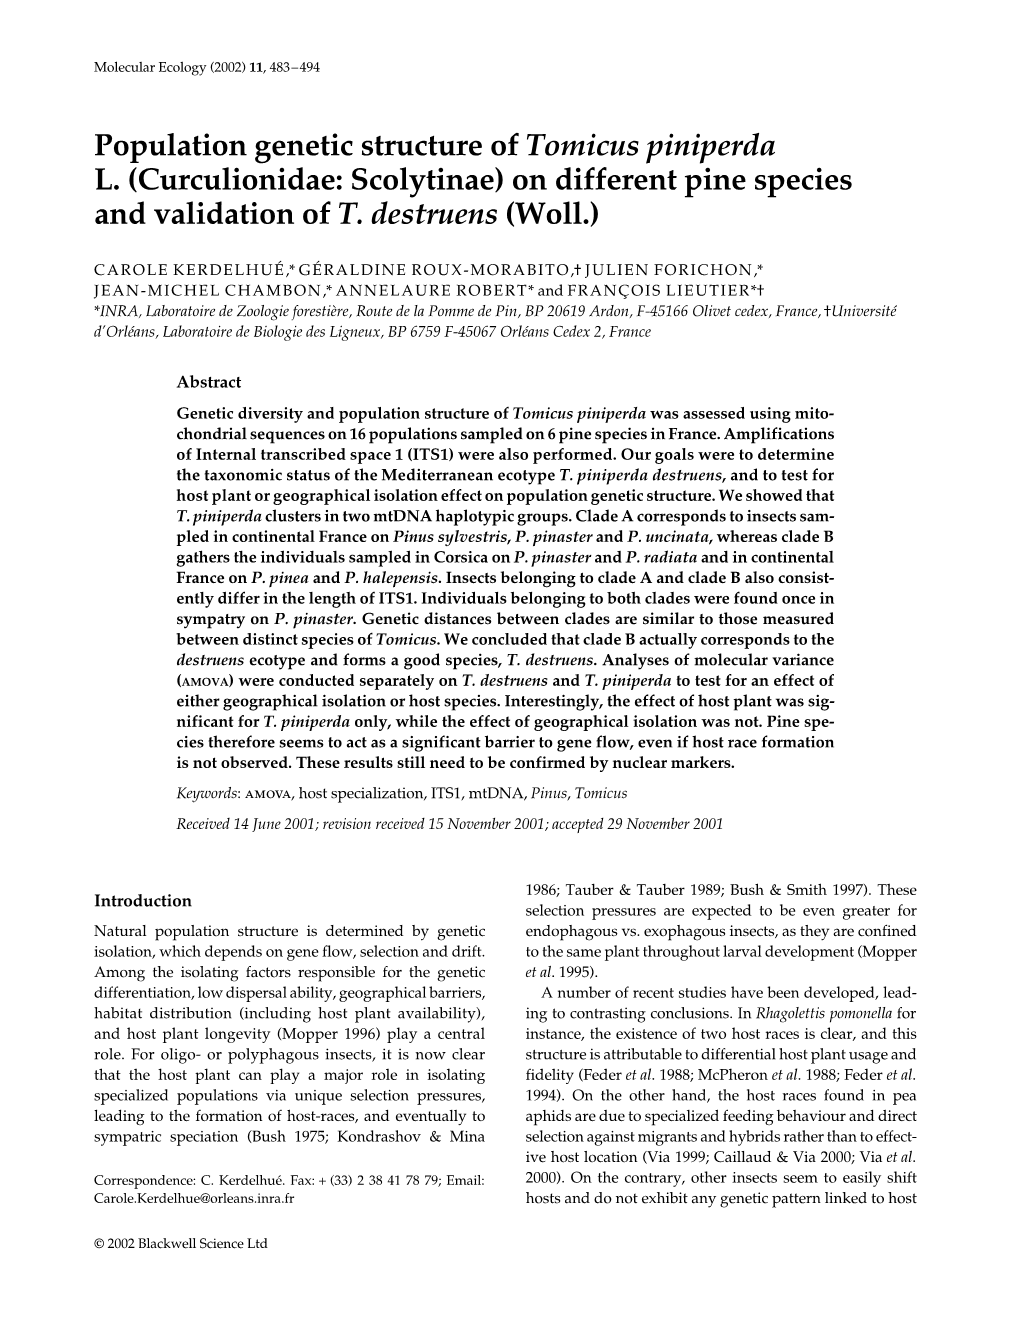 Population Genetic Structure of Tomicus Piniperda L. (Curculionidae: Scolytinae) on Different Pine Species and Validation of T